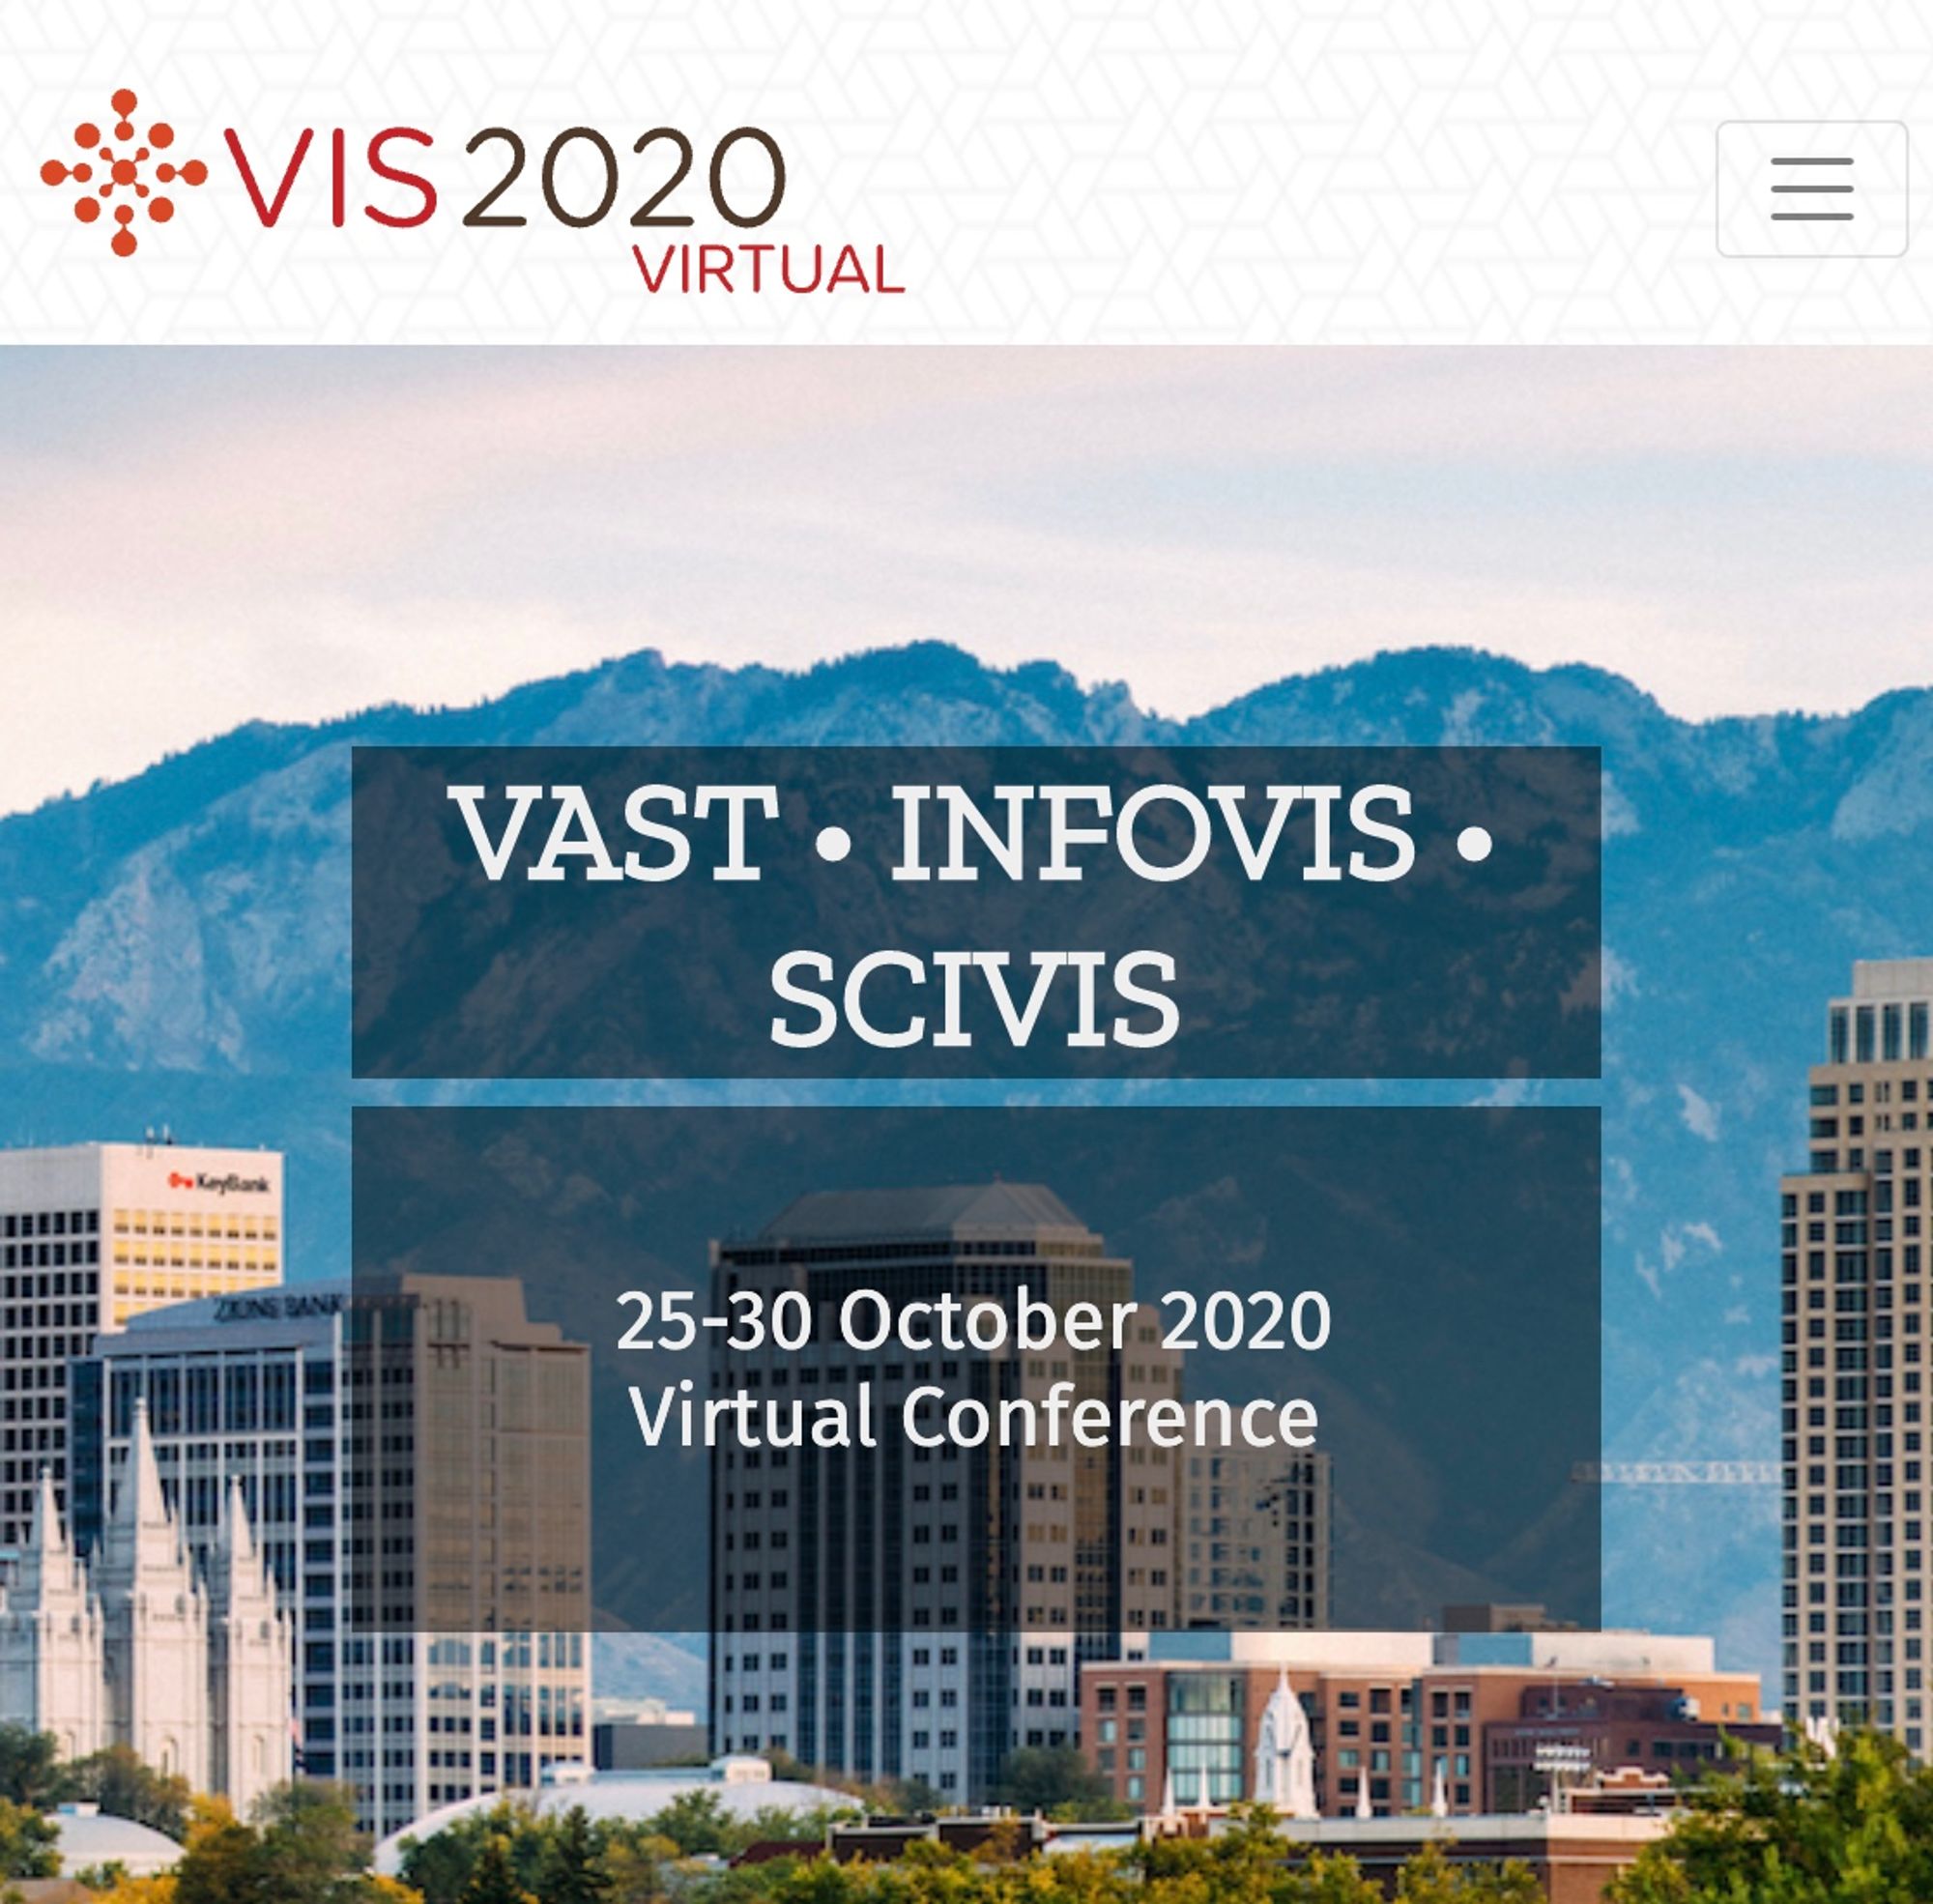 Virtual IEEE VIS 2020 -- Conference on Visualization.